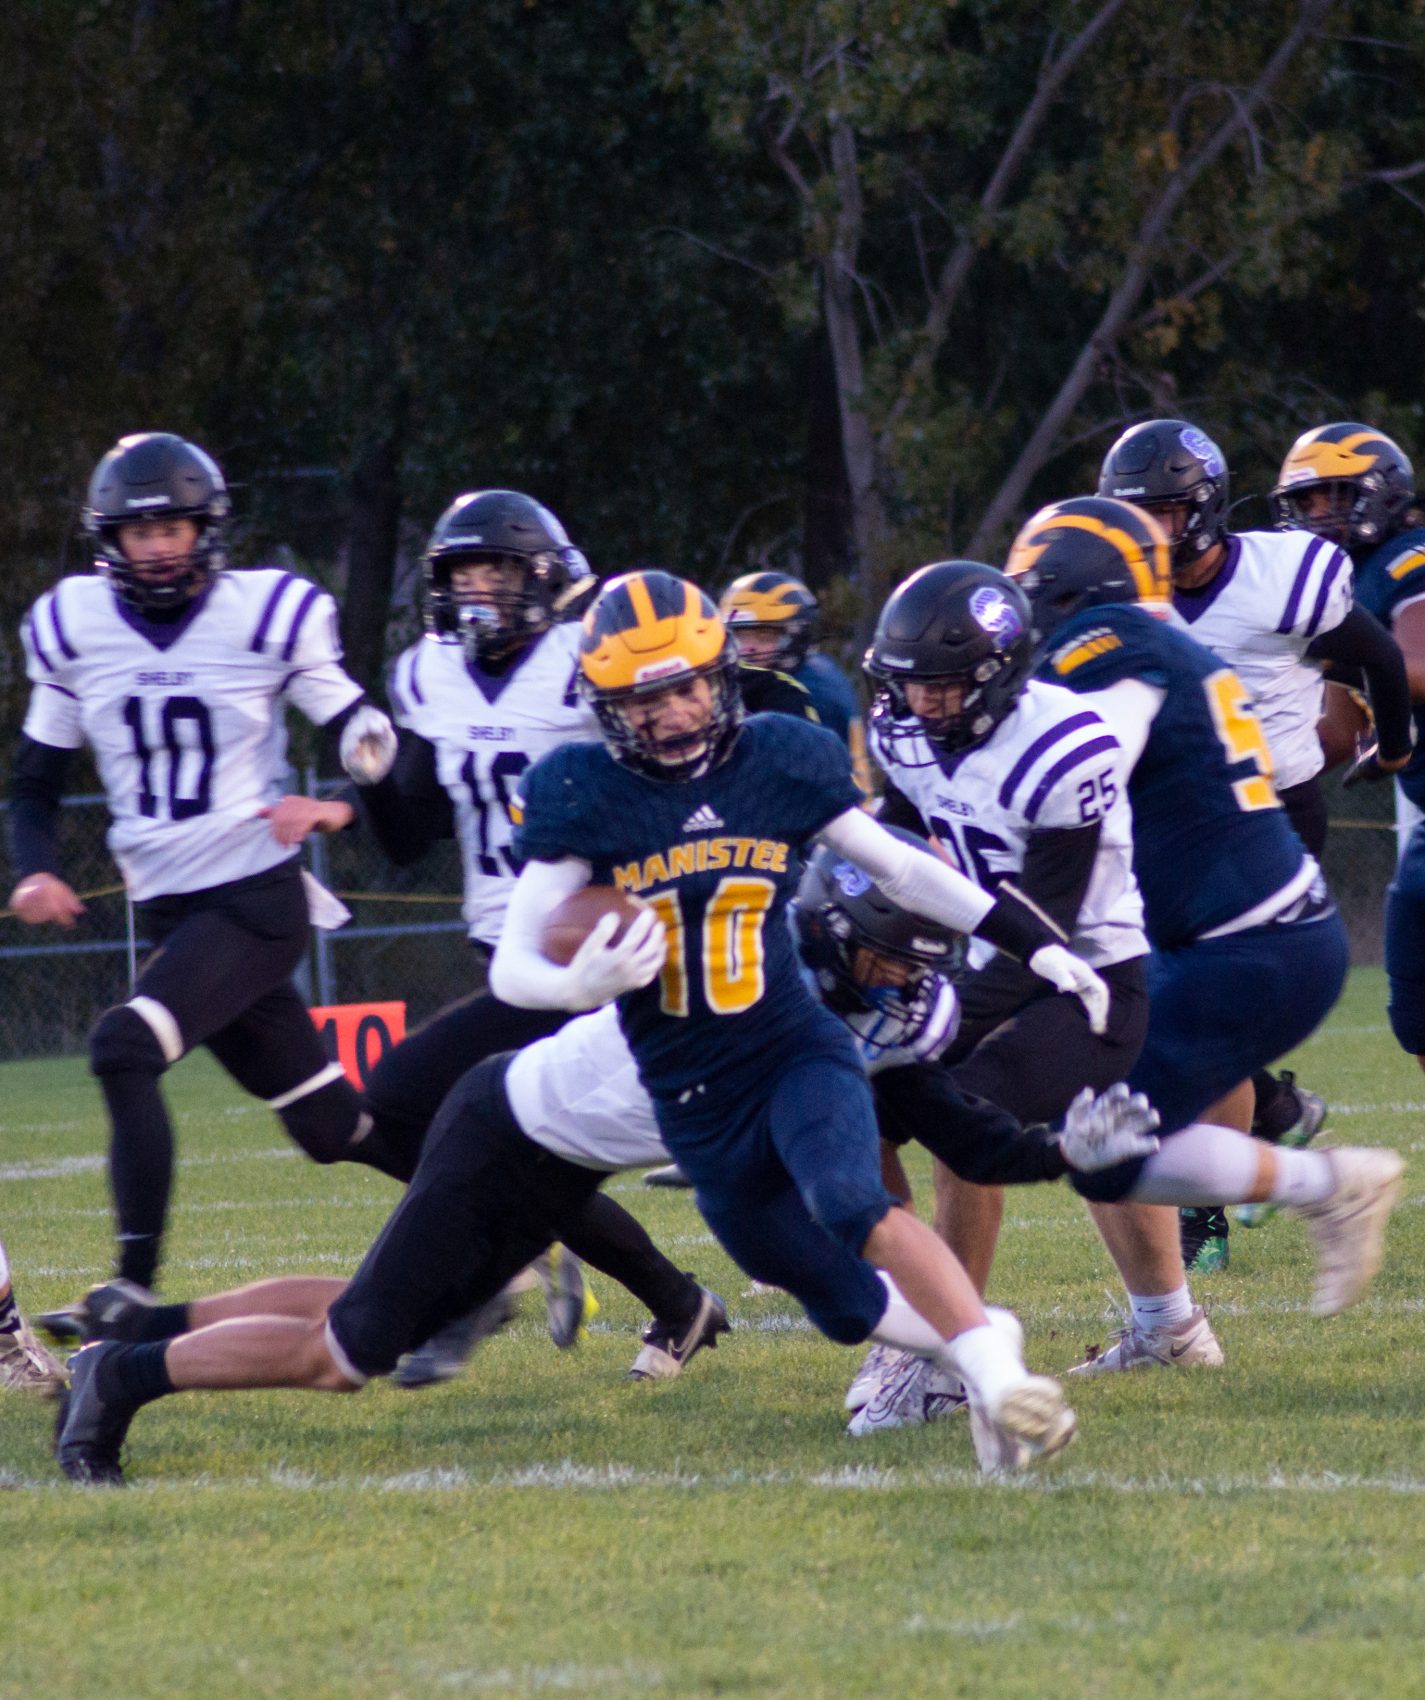 Manistee cruises past Shelby, 54-7